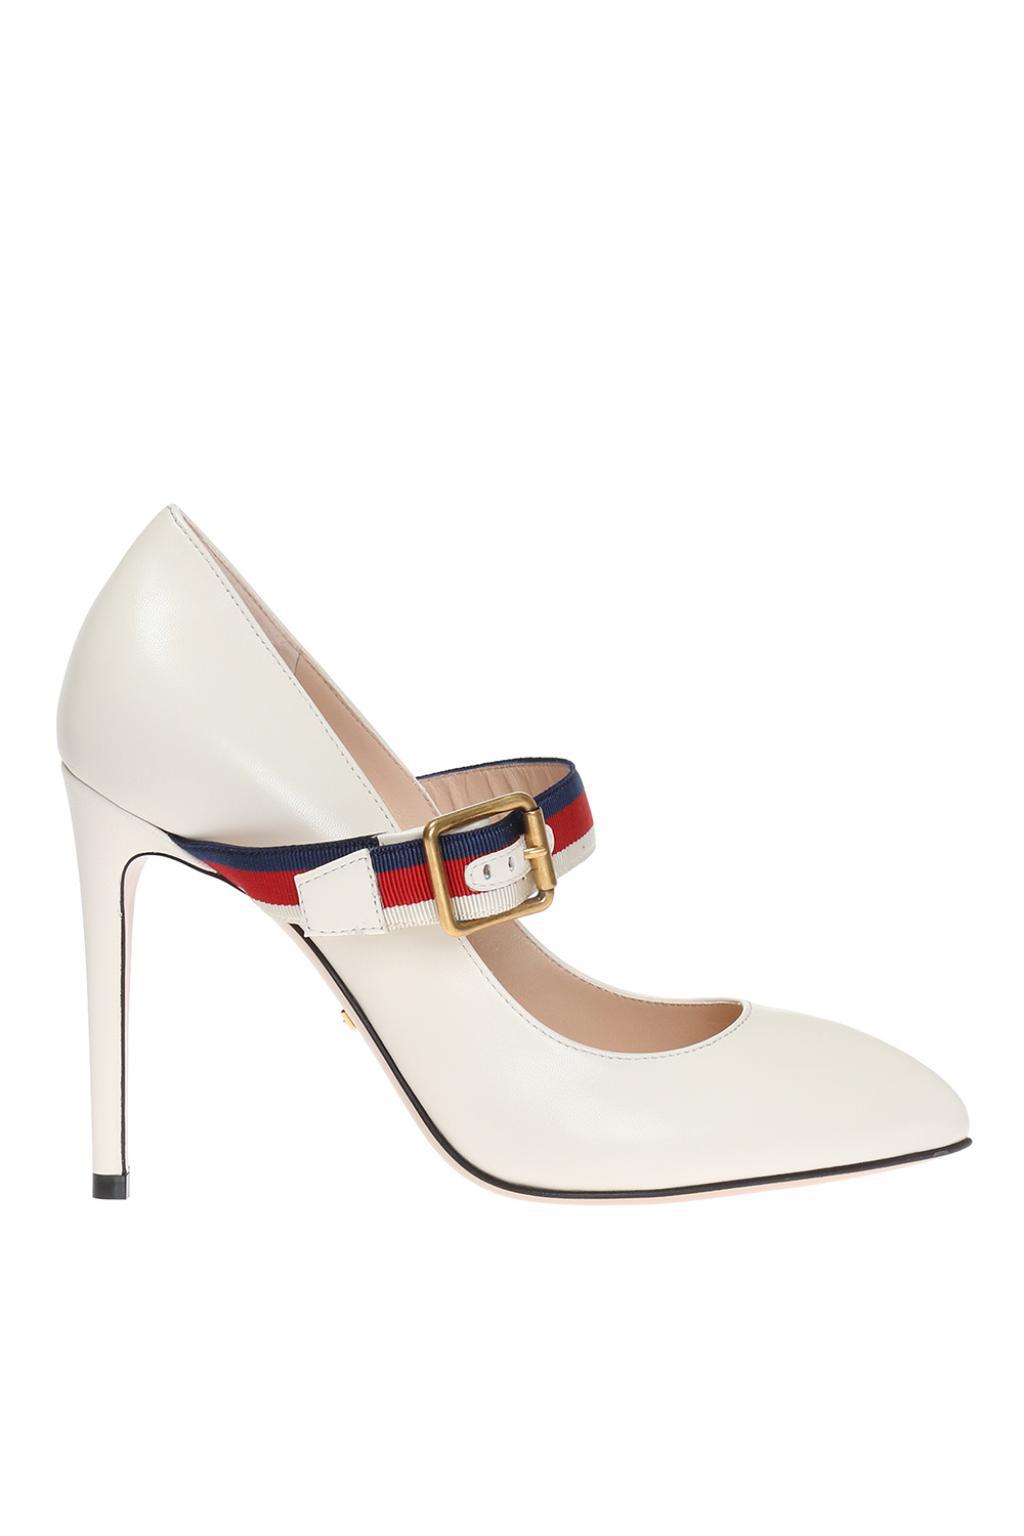 Gucci Leather 'sylvie' Pumps in White | Lyst